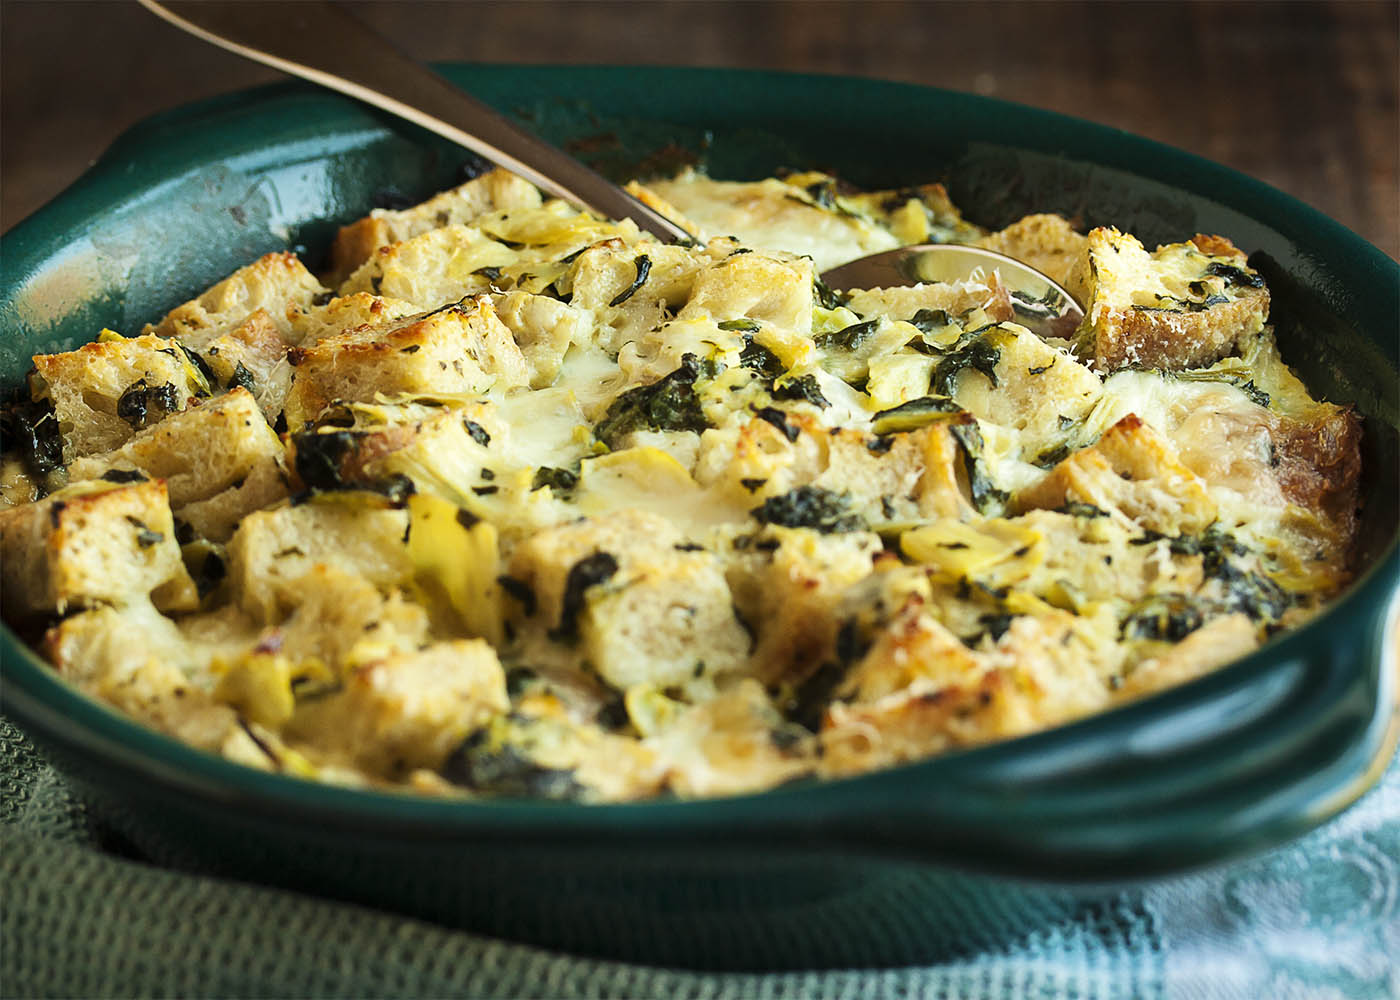 Spinach Artichoke Bread Pudding - This creamy, cheesy bread pudding full of diced artichokes and chopped spinach is the perfect way to use up that stale bread in your cupboard and turn it into a yummy, flavor-packed side dish. | justalittlebitofbacon.com